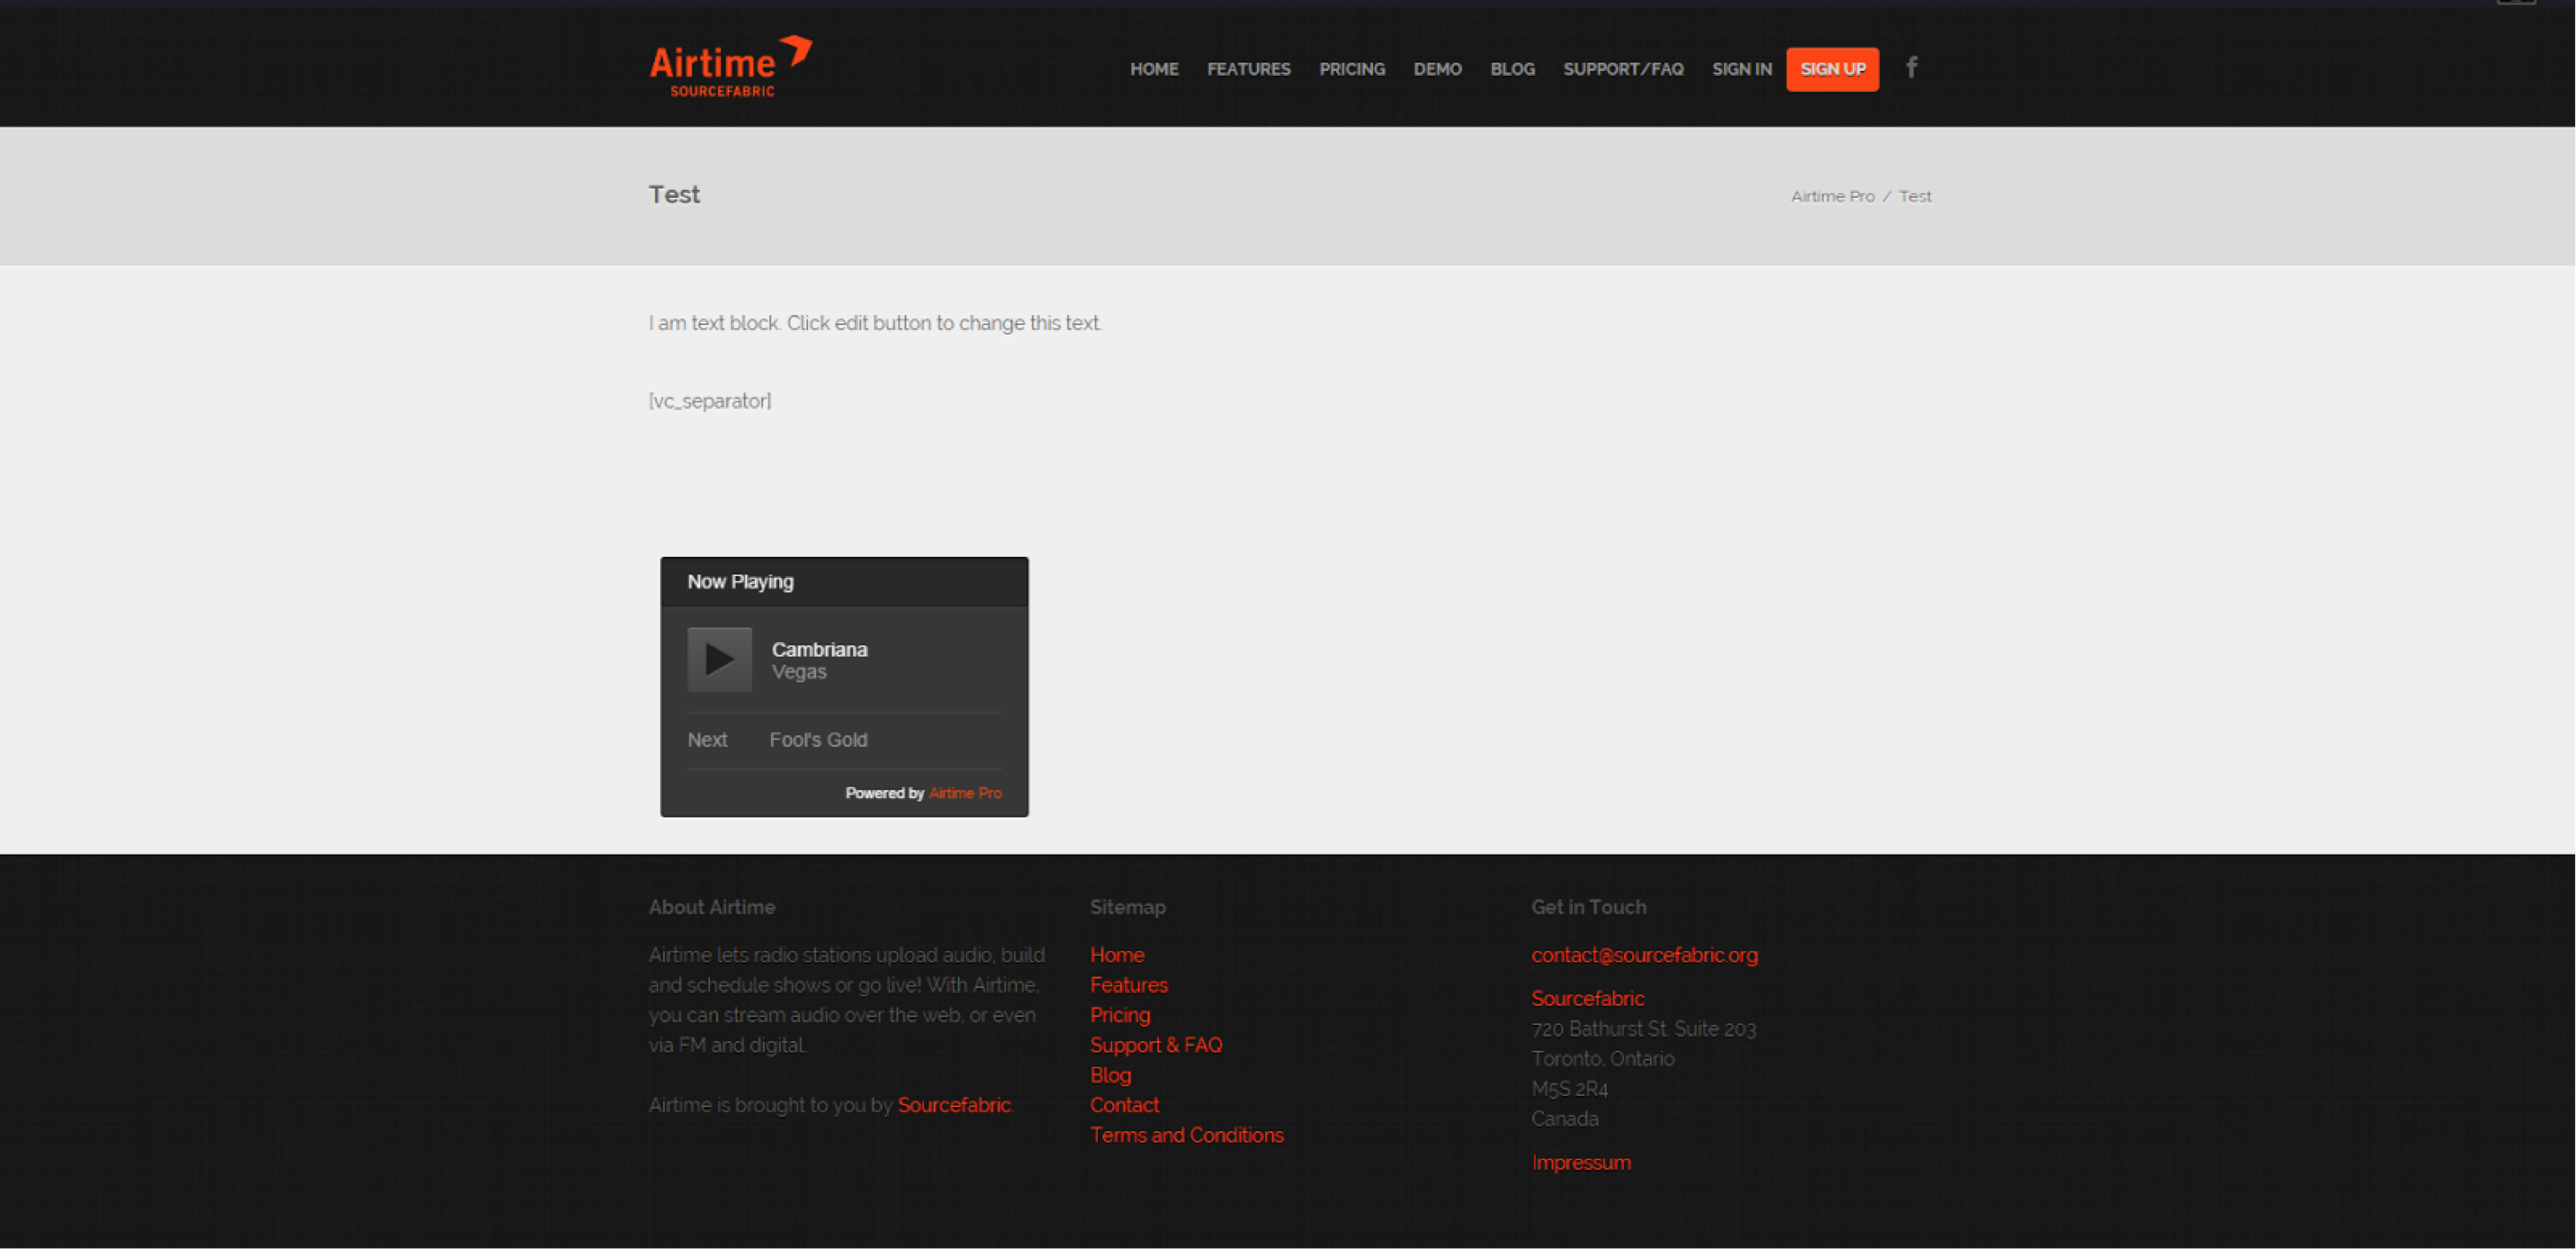 Airtime Pro player embedded on a Wordpress site.